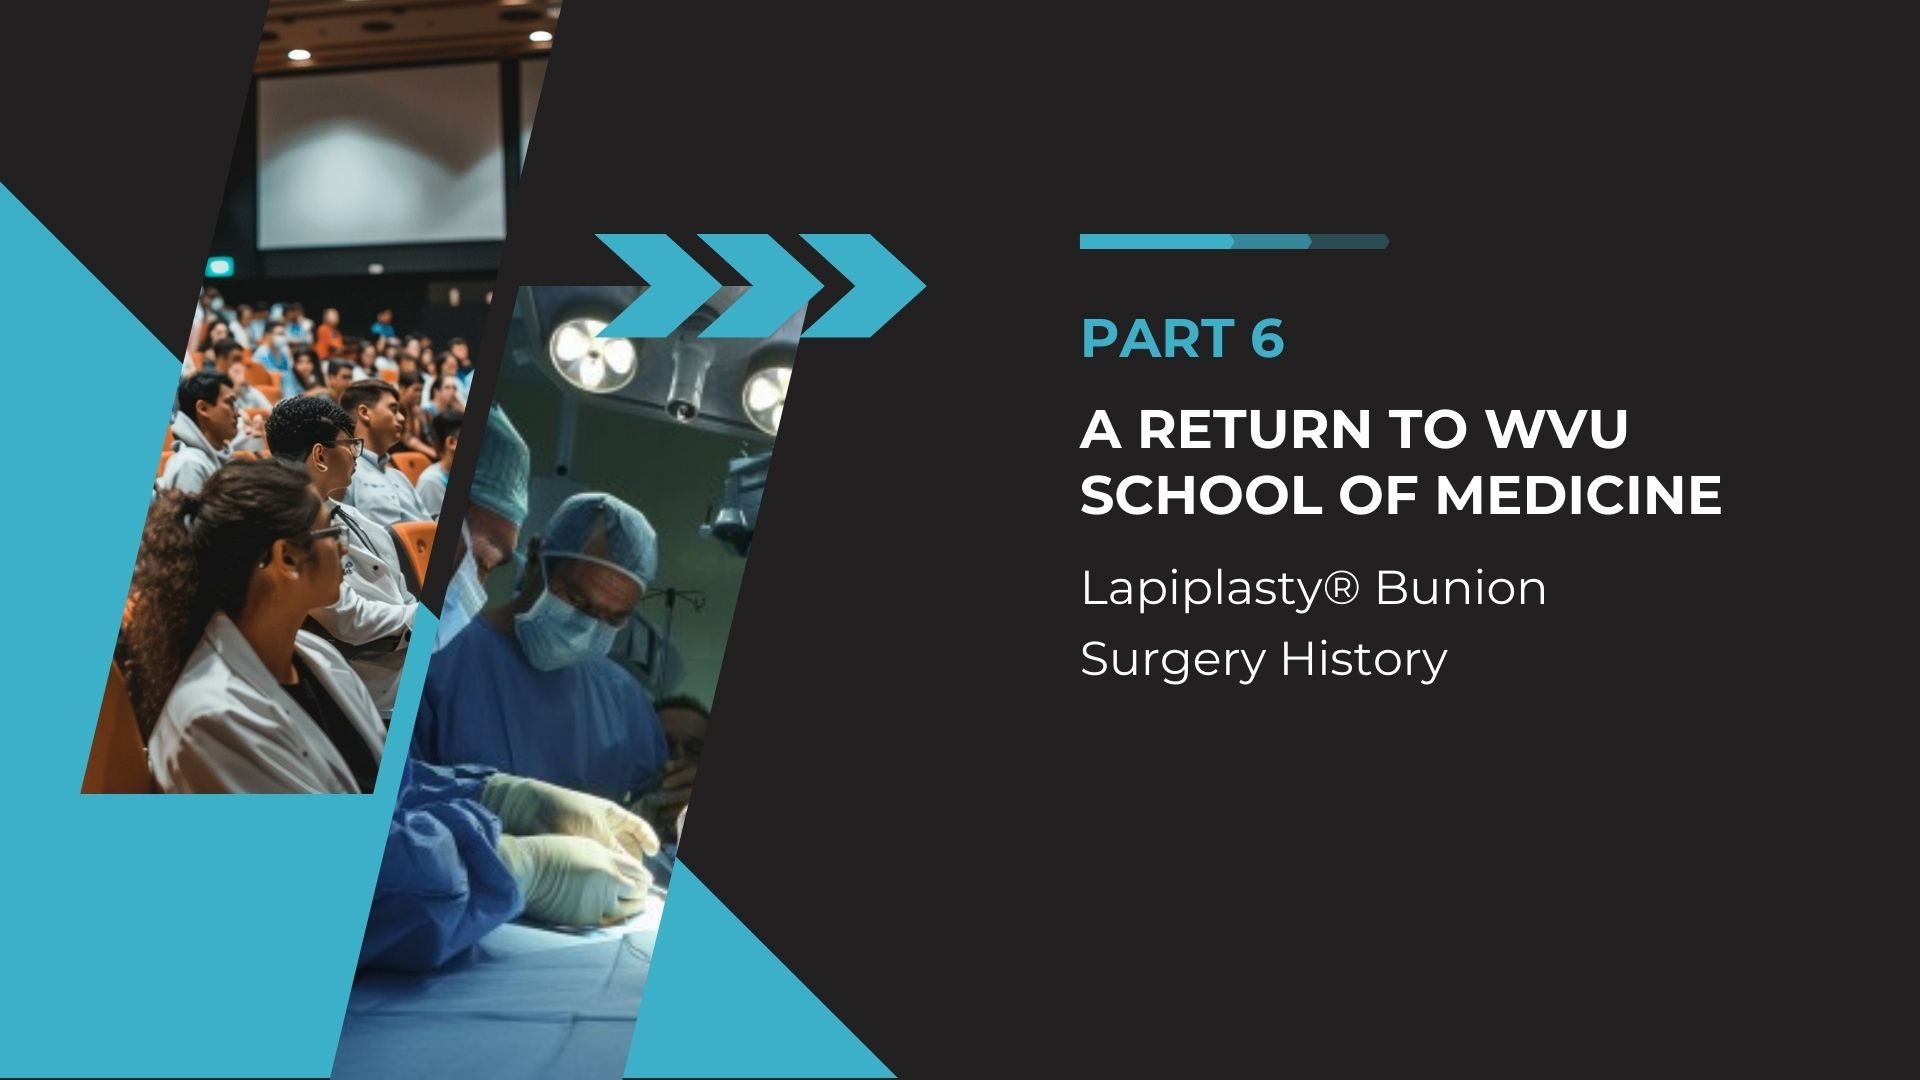 Slide presentation titled 'PART 6 A RETURN TO WVU SCHOOL OF MEDICINE' with a two-part background. On the left, a photo of medical students in an auditorium, attentively watching a presentation. On the right, a photo of a medical team performing surgery, focusing on the operation under bright surgical lights. The slide mentions 'Lapiplasty® Bunion Surgery History